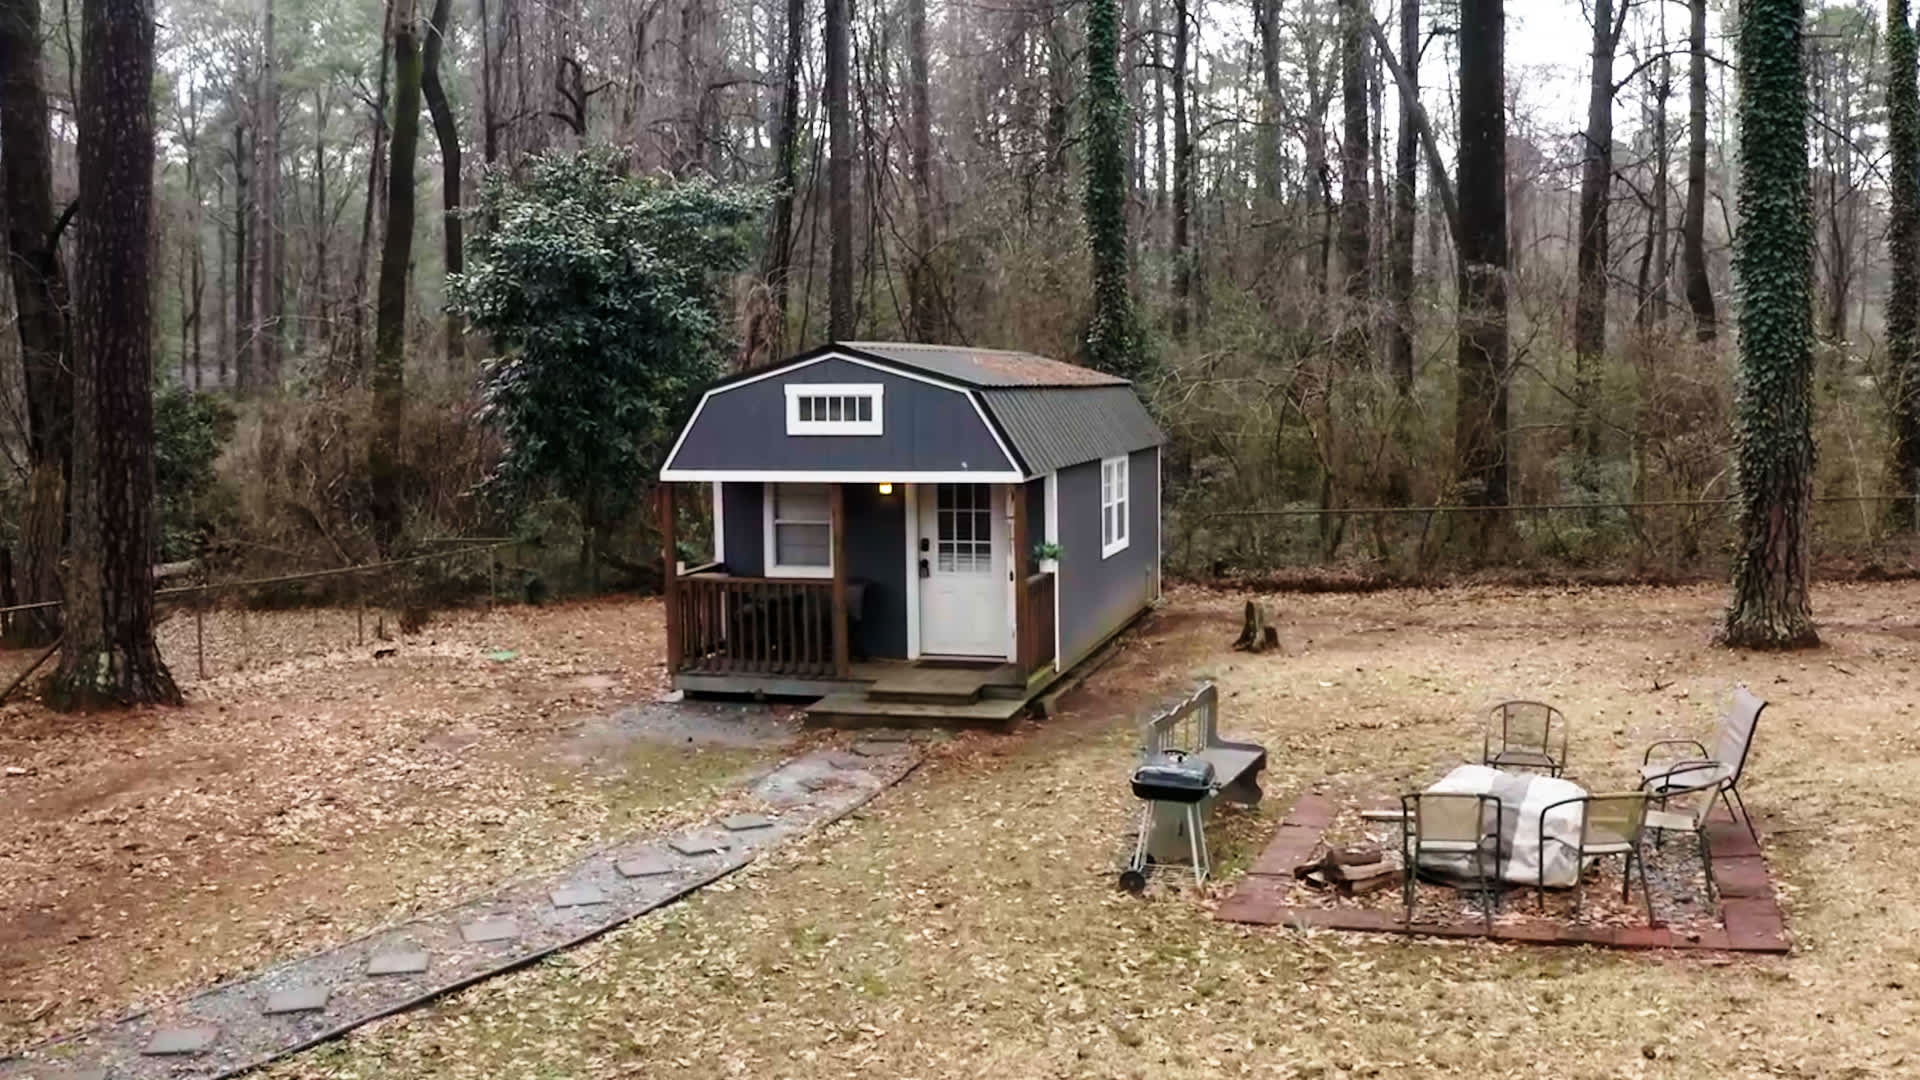 Precious' tiny home sits in the back corner of her 7,280-square-foot backyard.